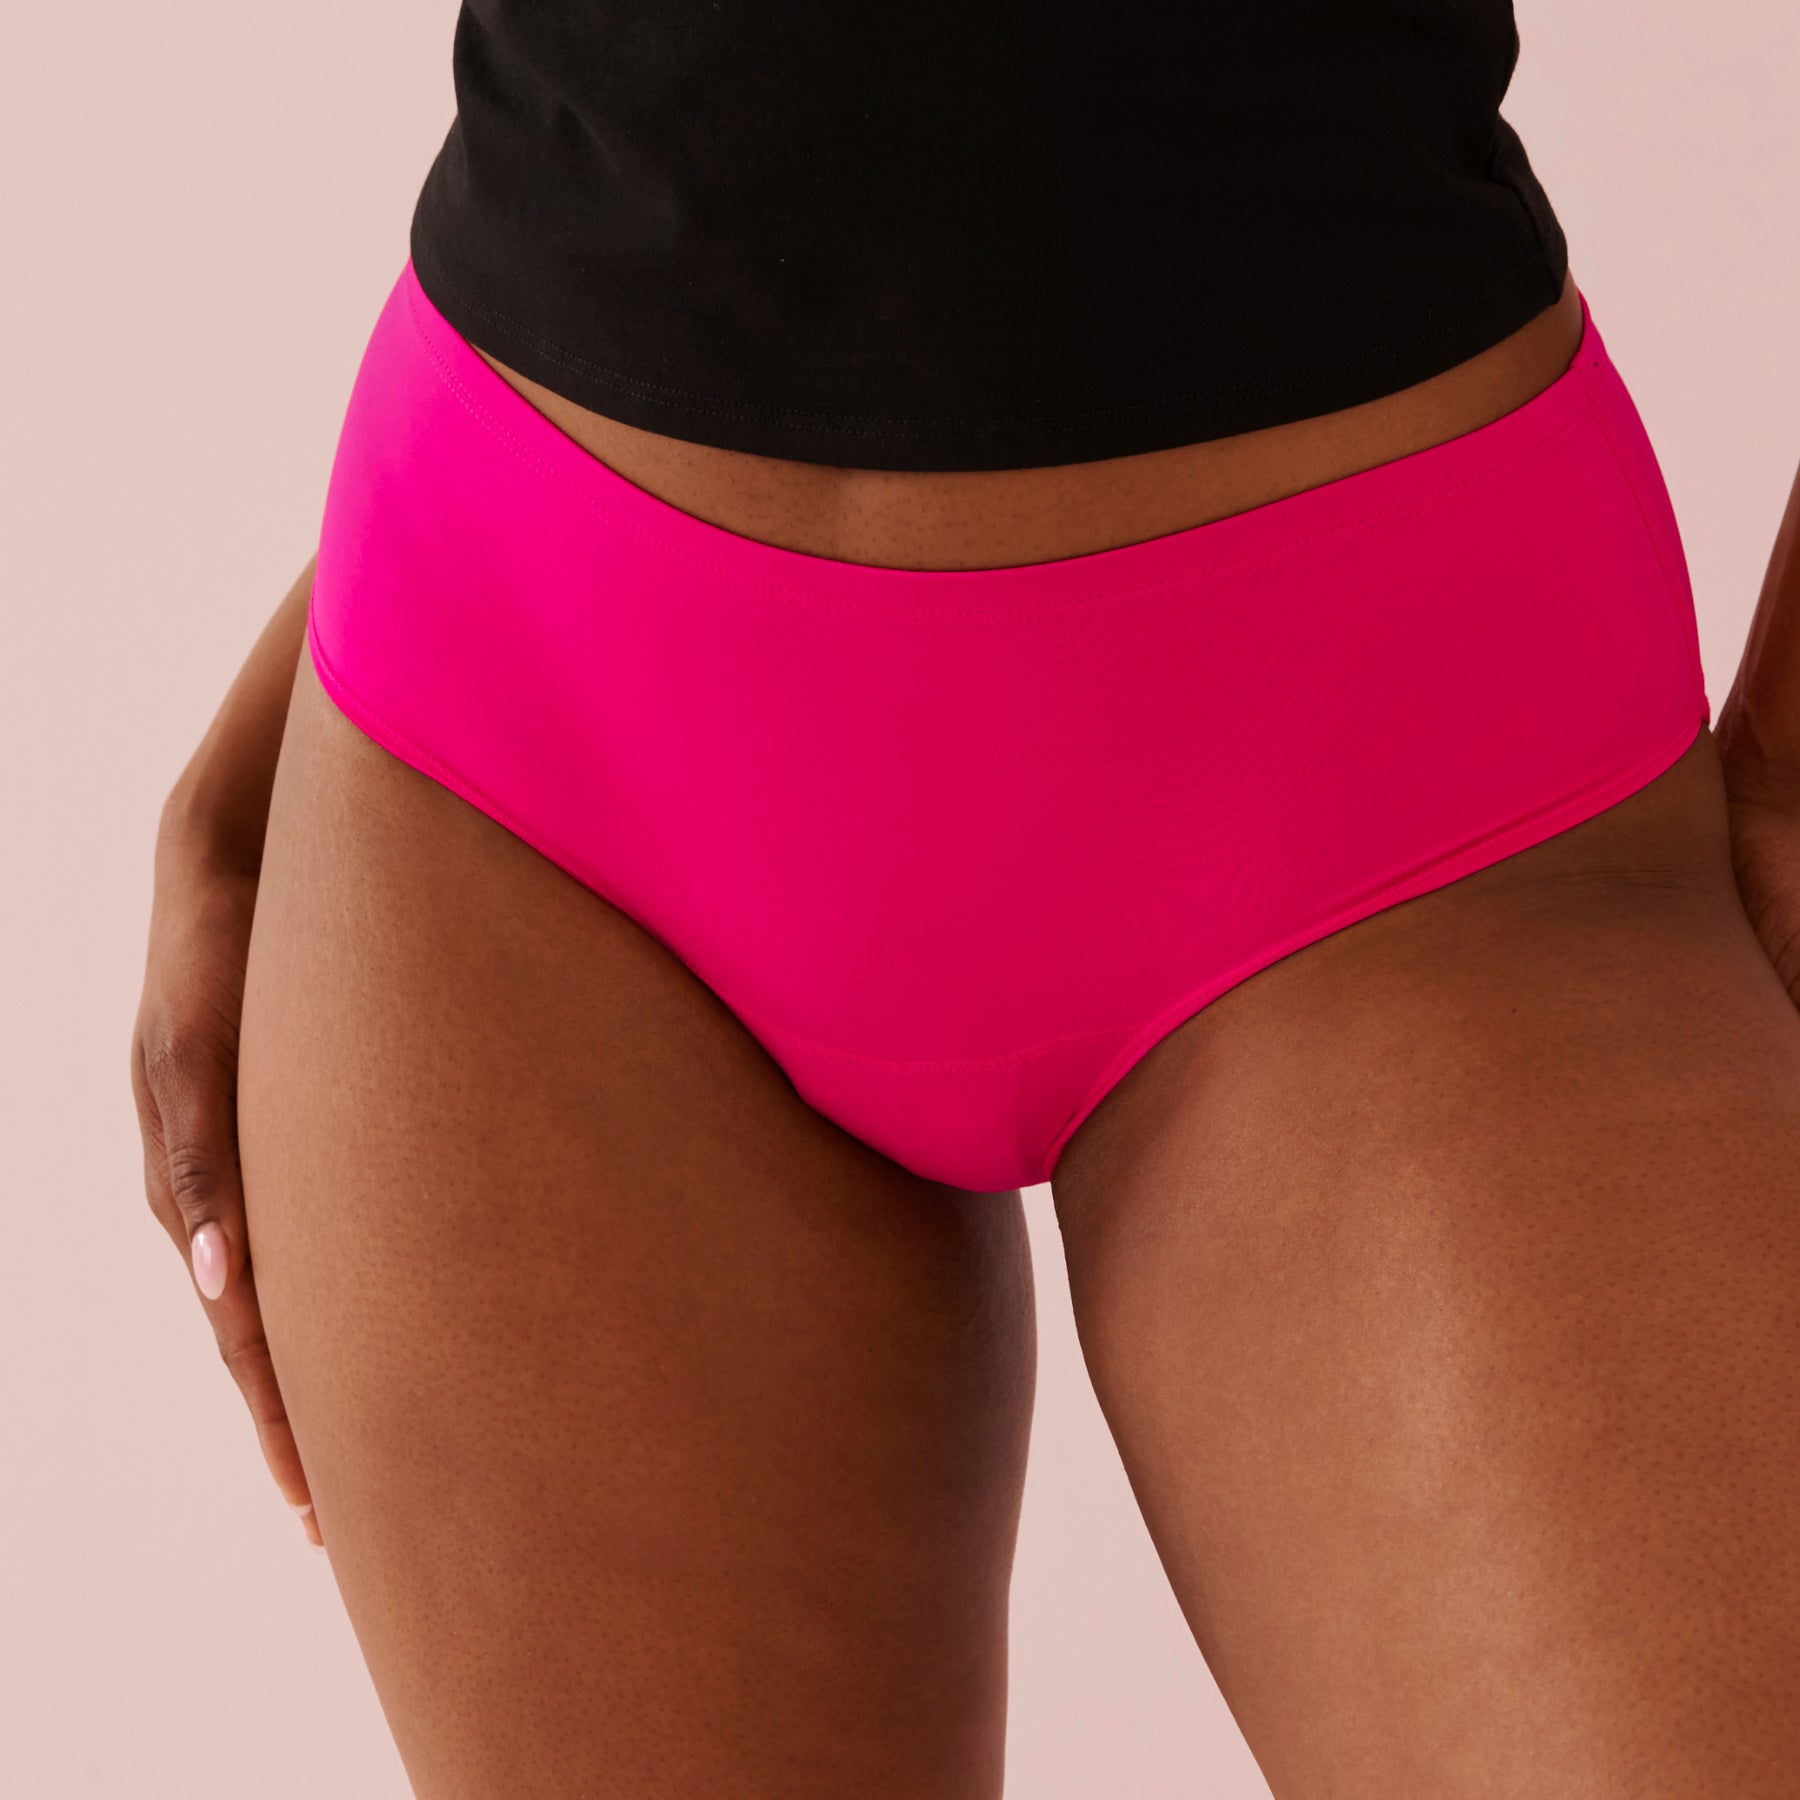 From of the pink hiphugger period panty – NEWEX